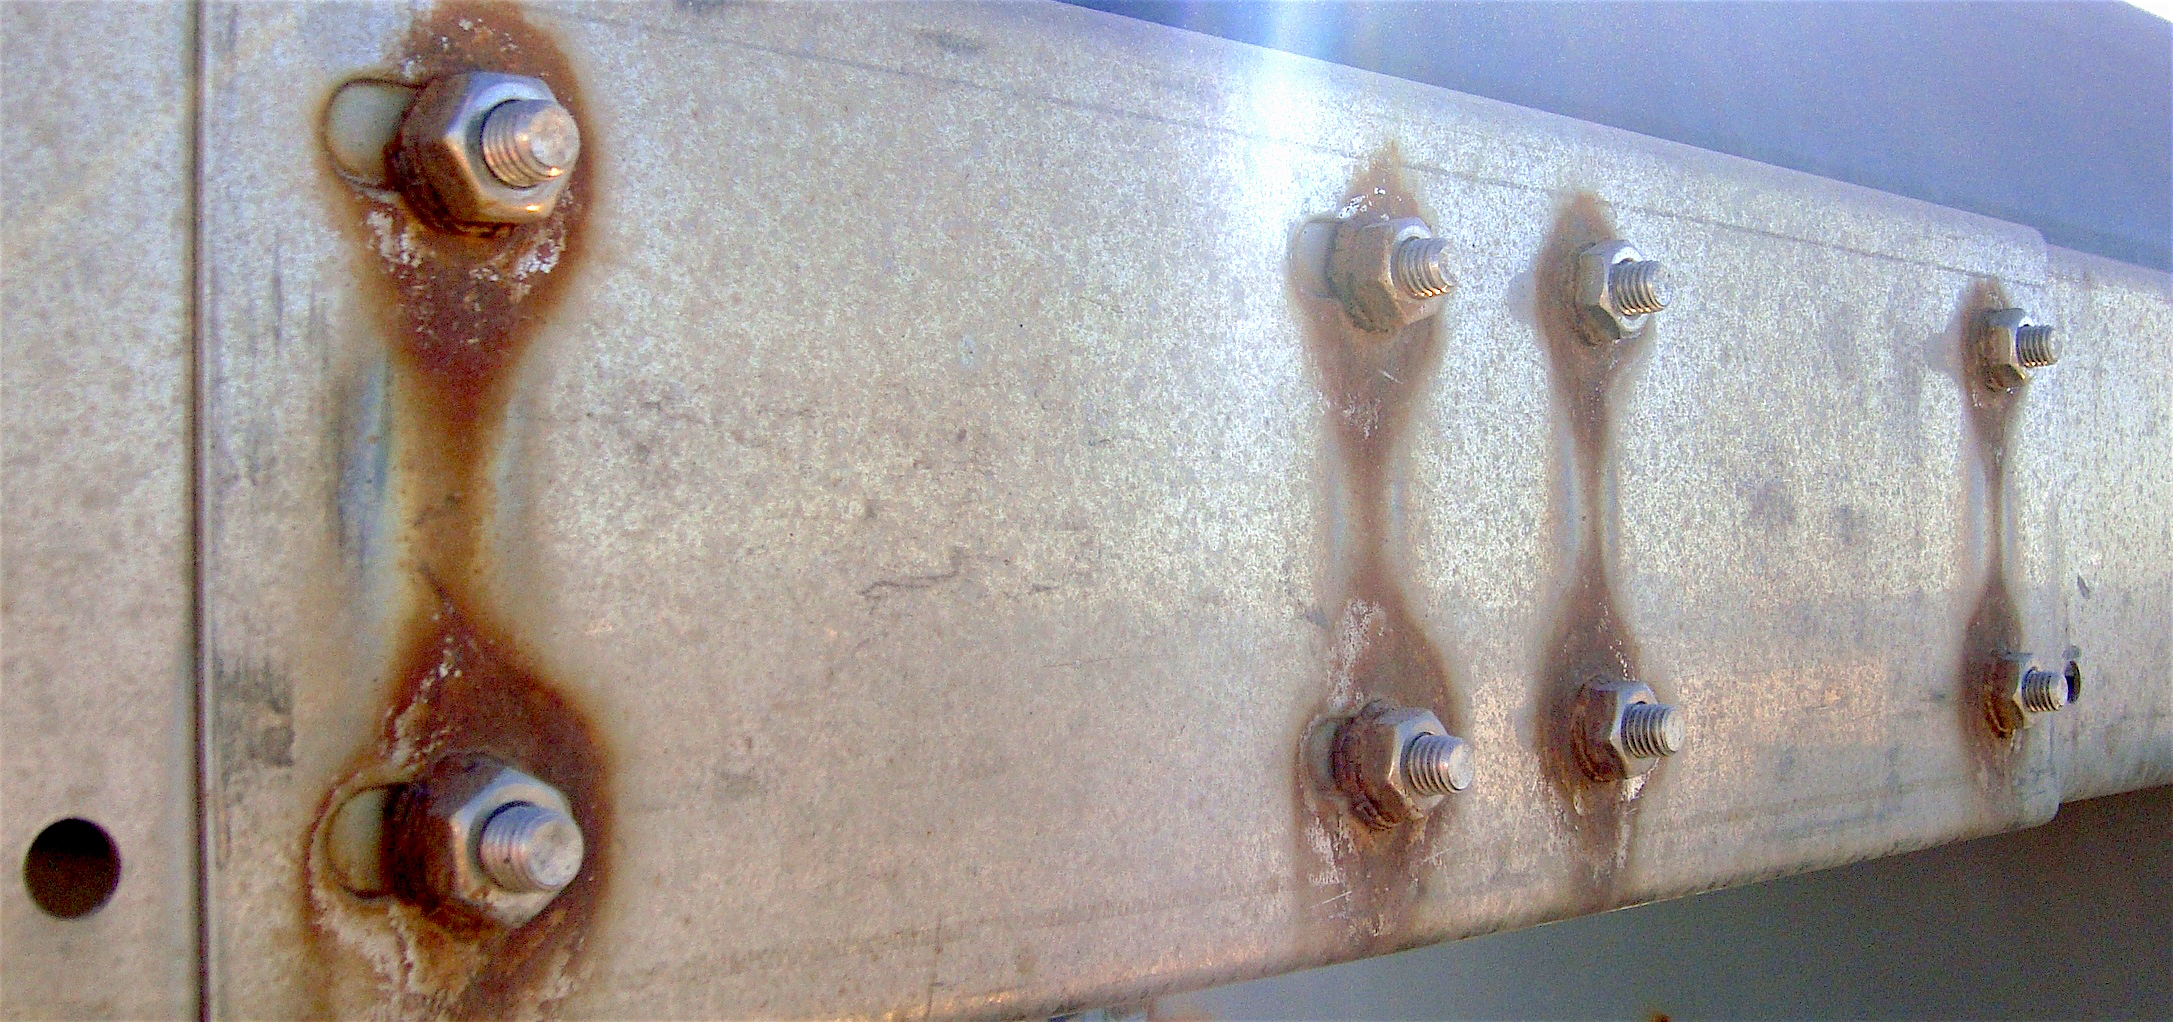 Aircraft corrosion type: dissimilar metal corrosion